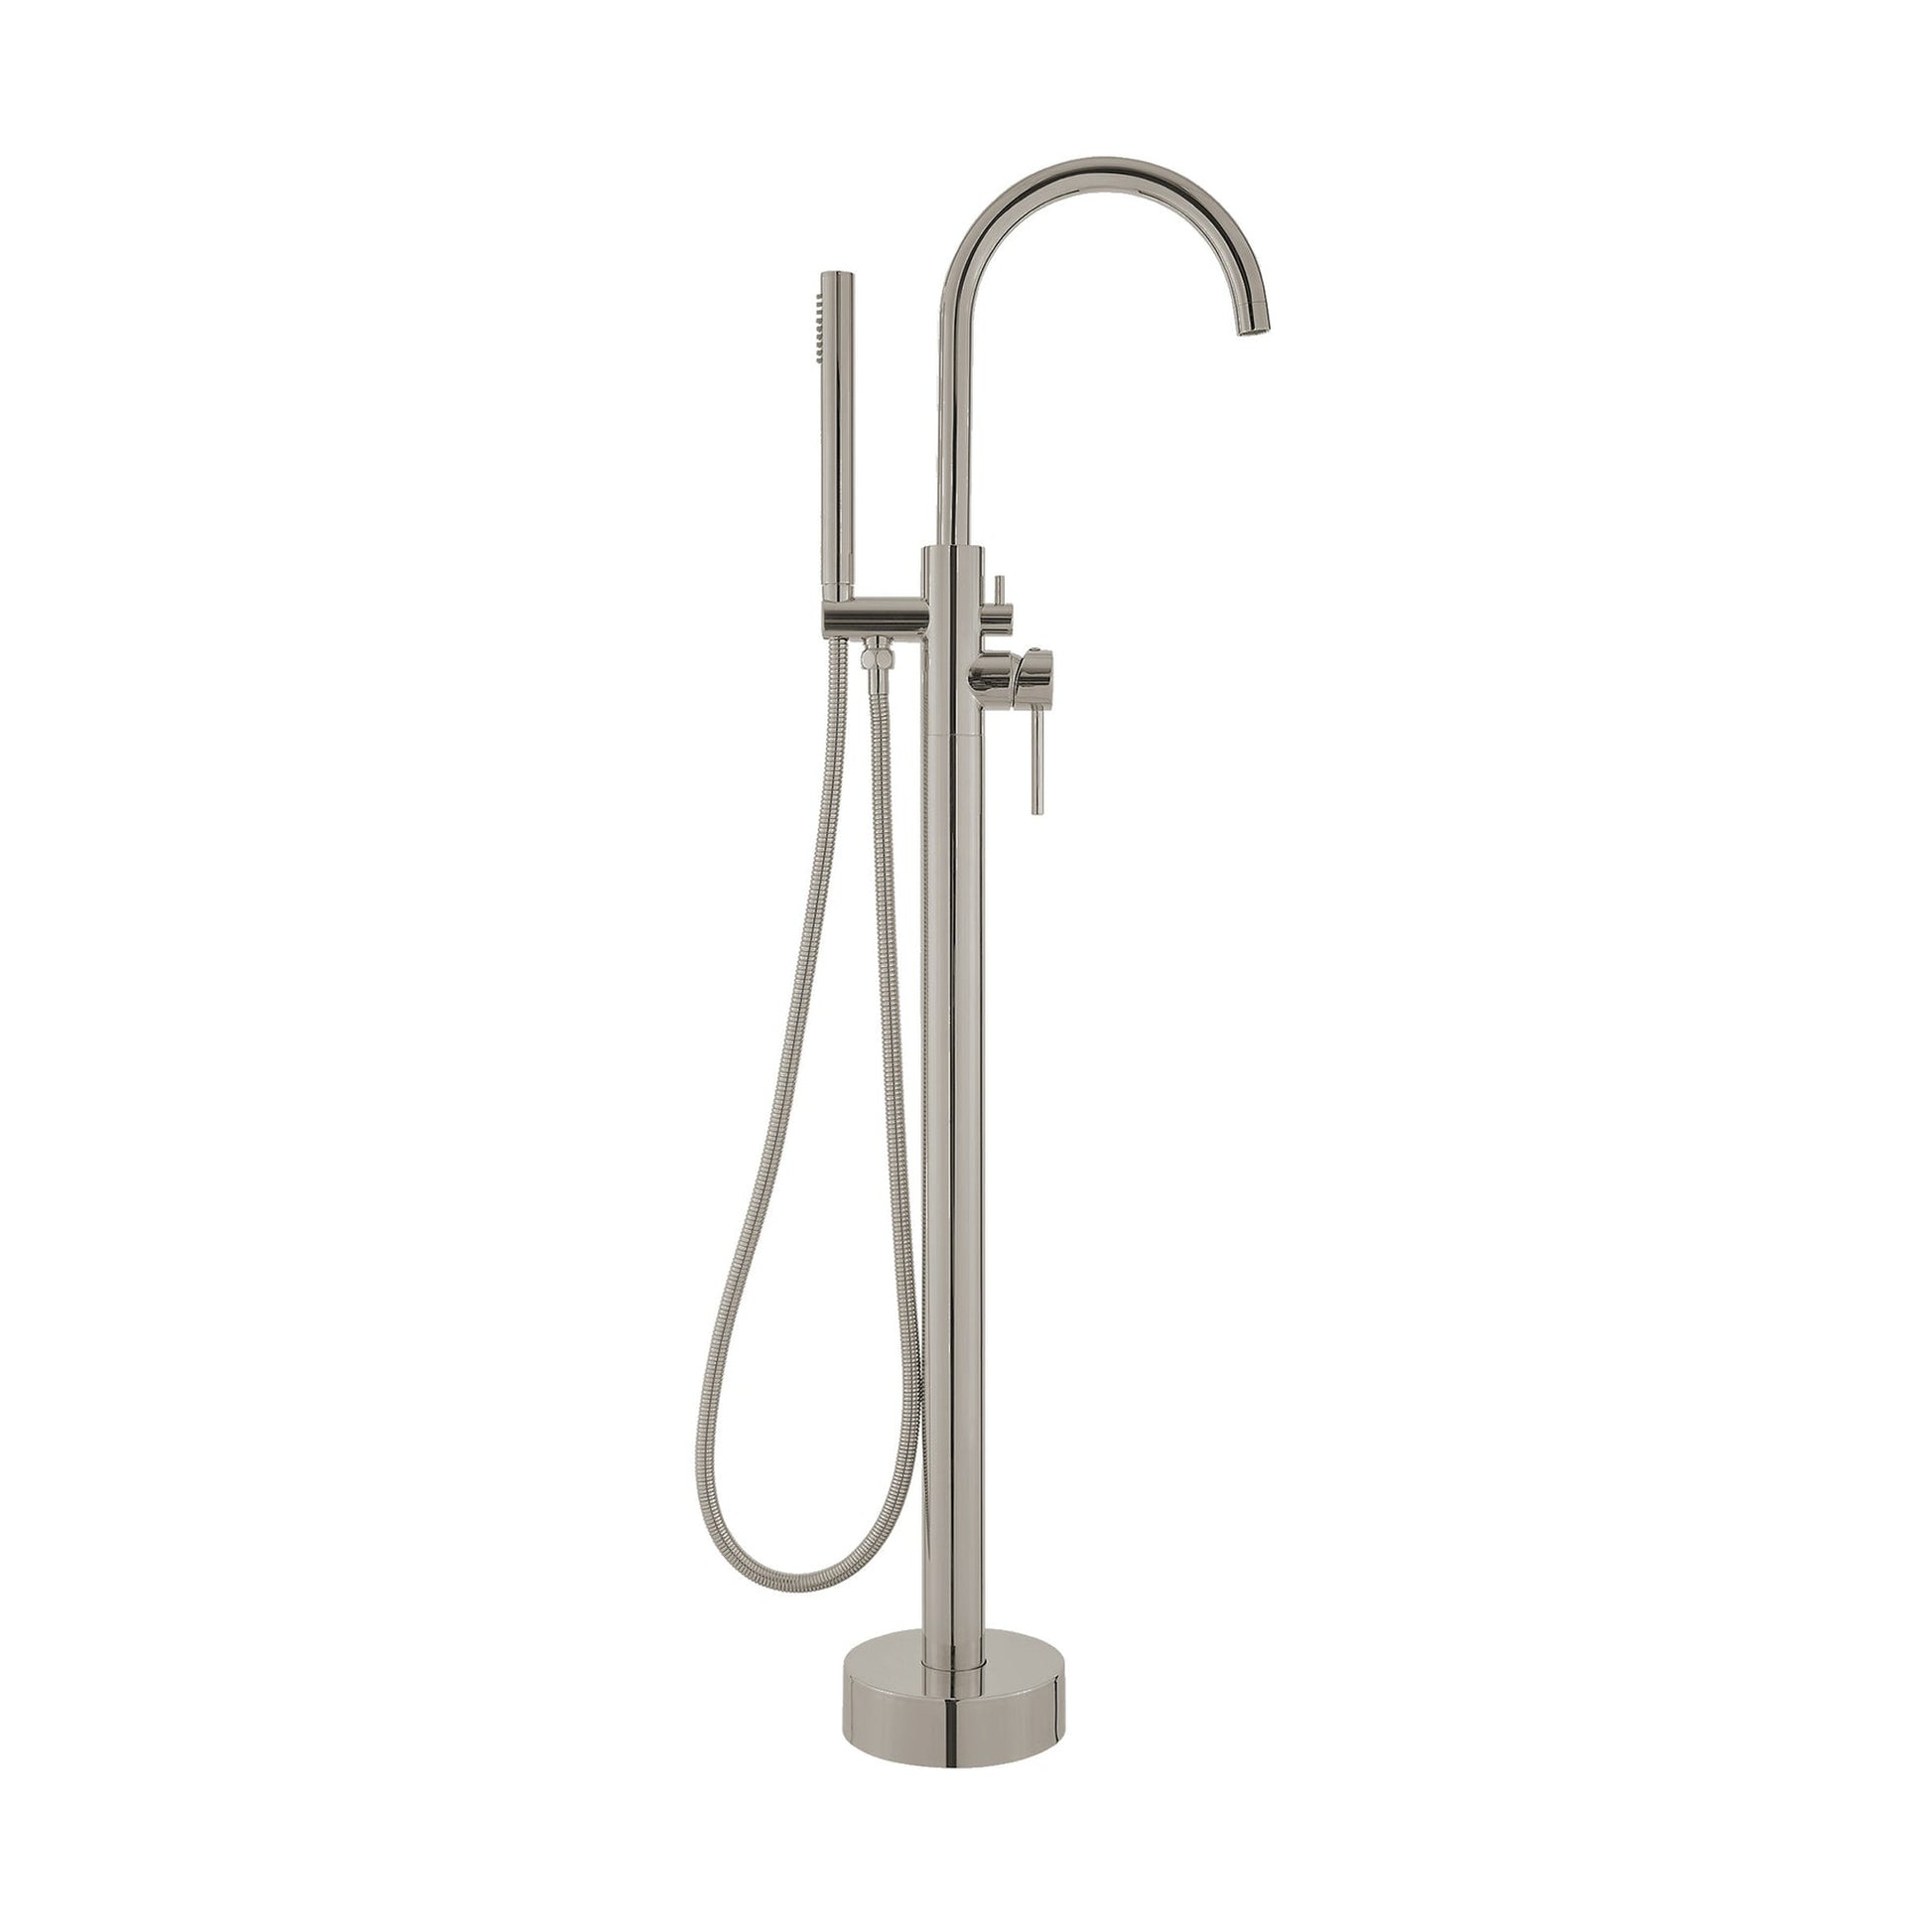 Swiss Madison Ivy 43" Brushed Nickel Single Hole Floor Mounted Bathtub Faucet With Hand Shower, Tub Spout and Handle